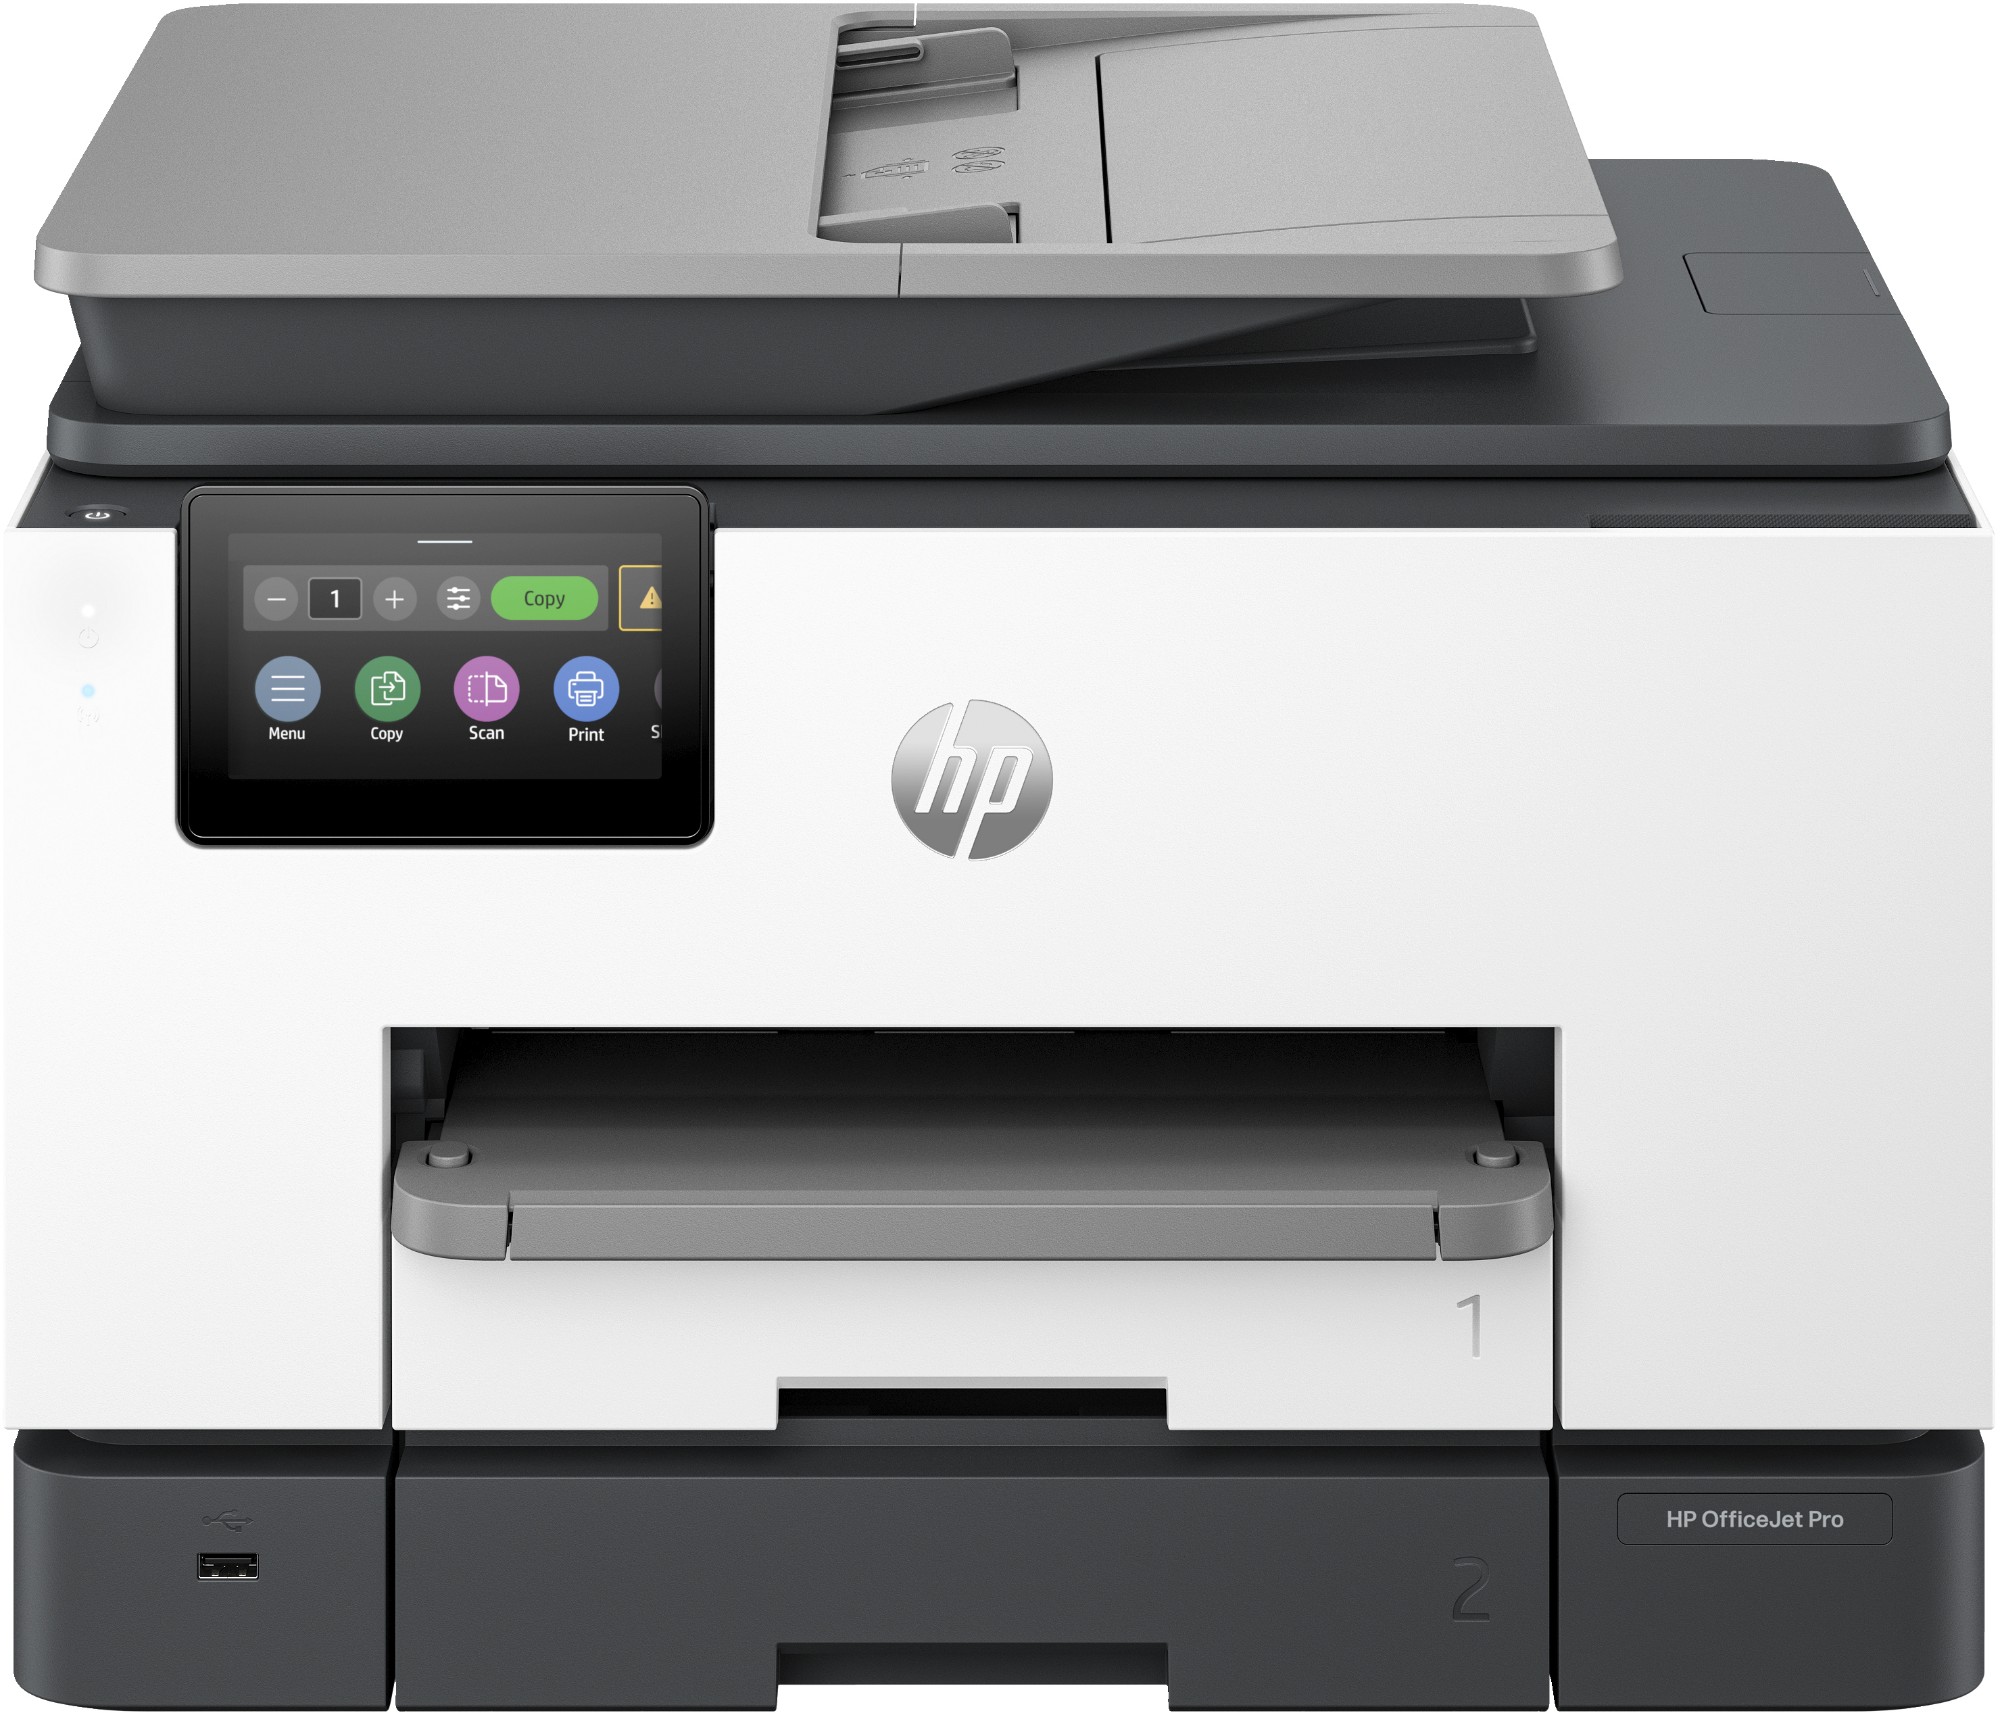 HP OfficeJet Pro HP 9132e All-in-One Printer, Colour, Printer for Small medium business, Print, copy, scan, fax, Wireless; HP+; HP Instant Ink eligible; Two-sided printing; Two-sided scanning; Automatic document feeder; Fax; Touchscreen; Smart Advance Sca